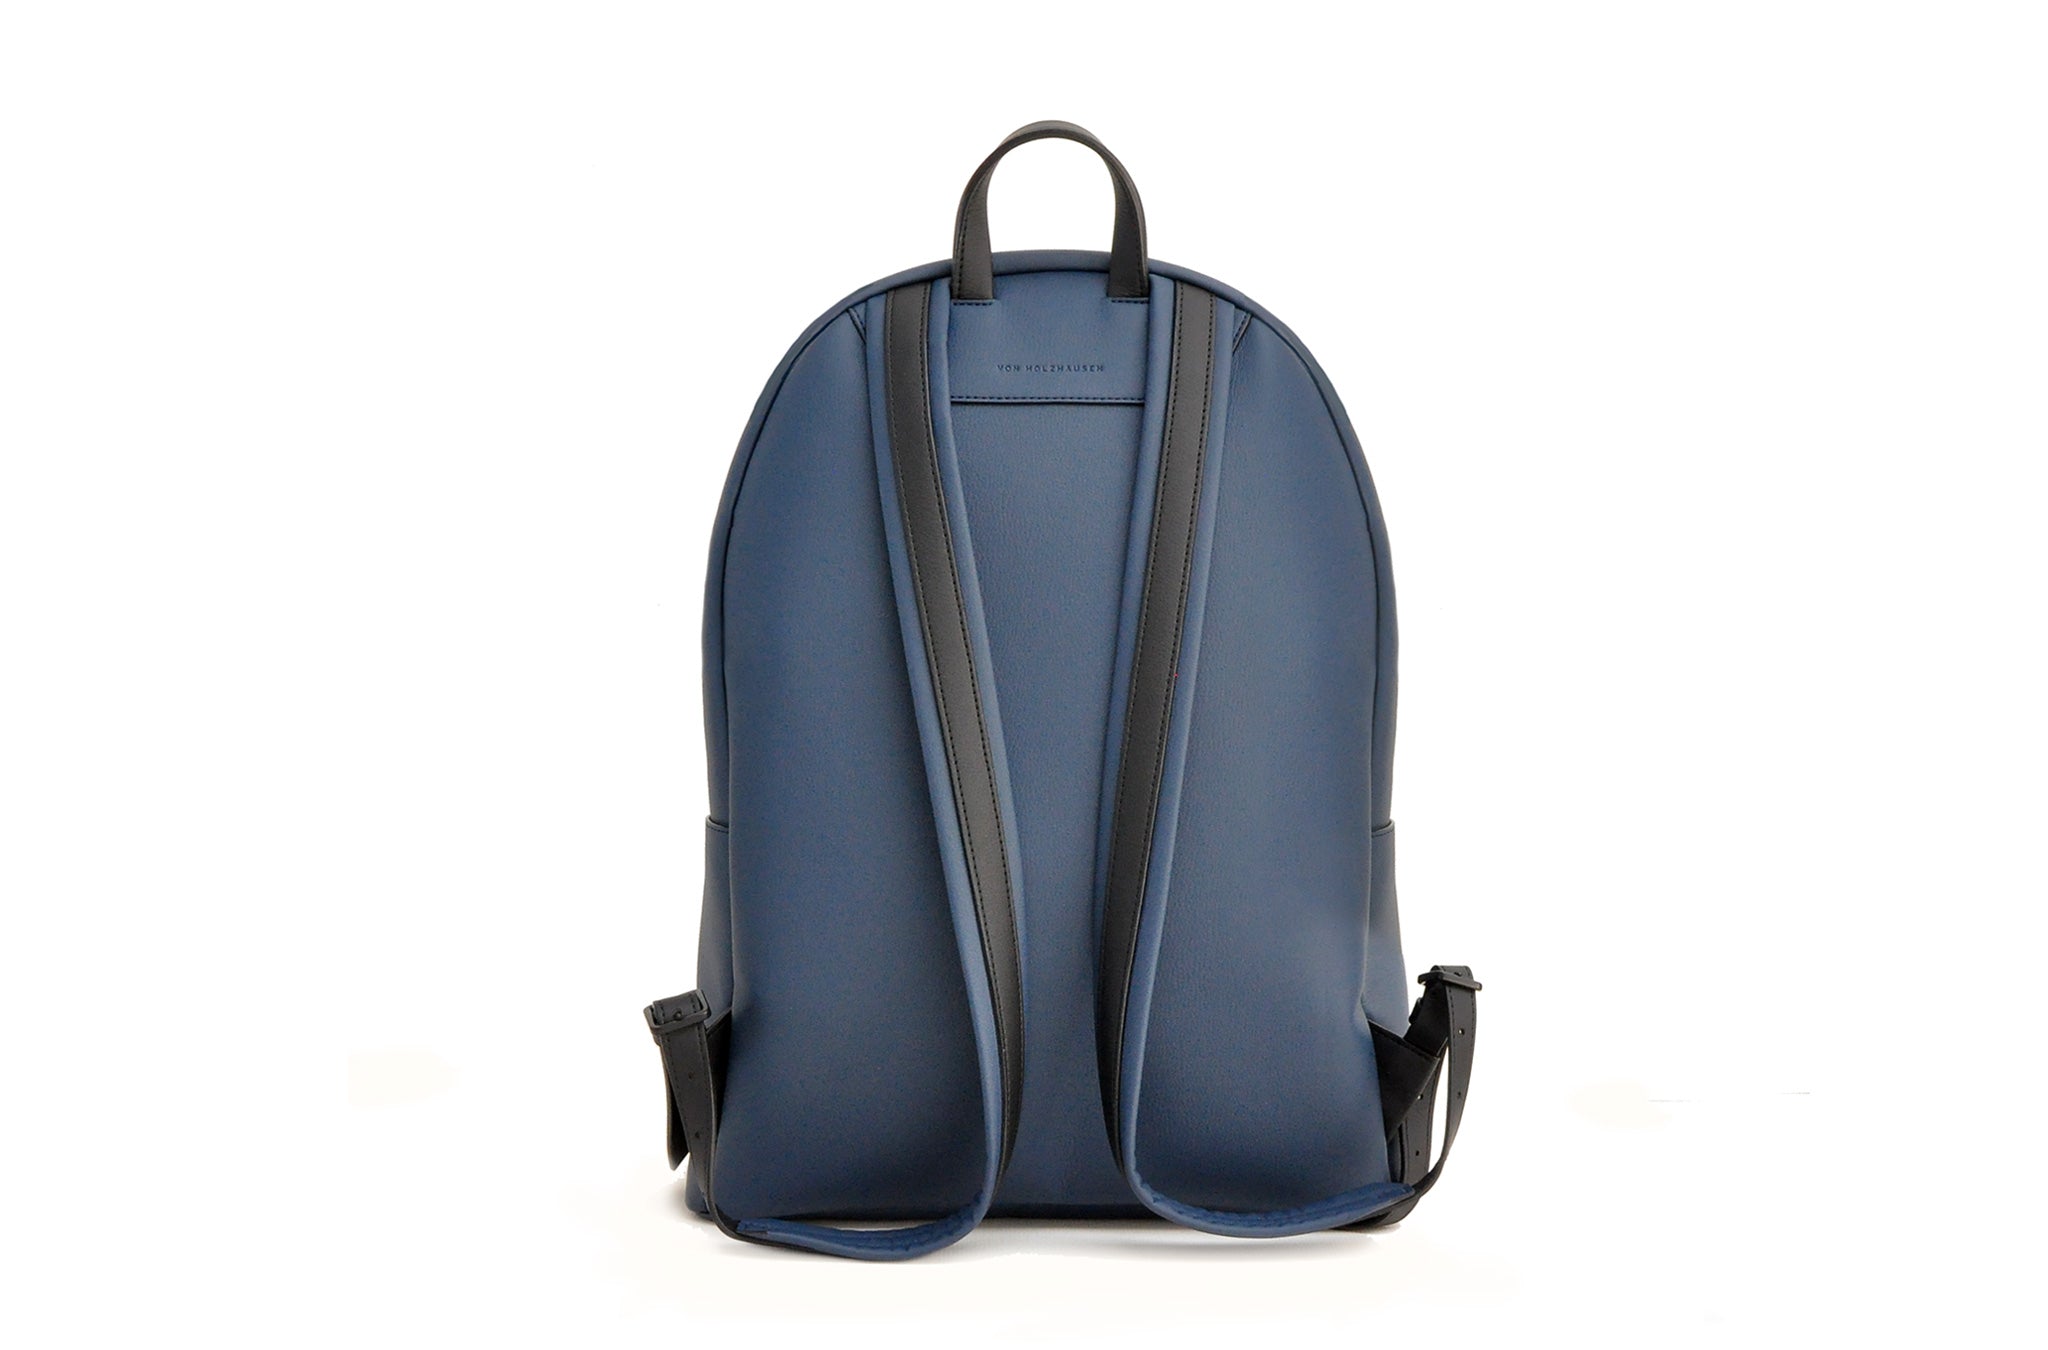 The Classic Backpack in Technik-Leather in Denim and Black